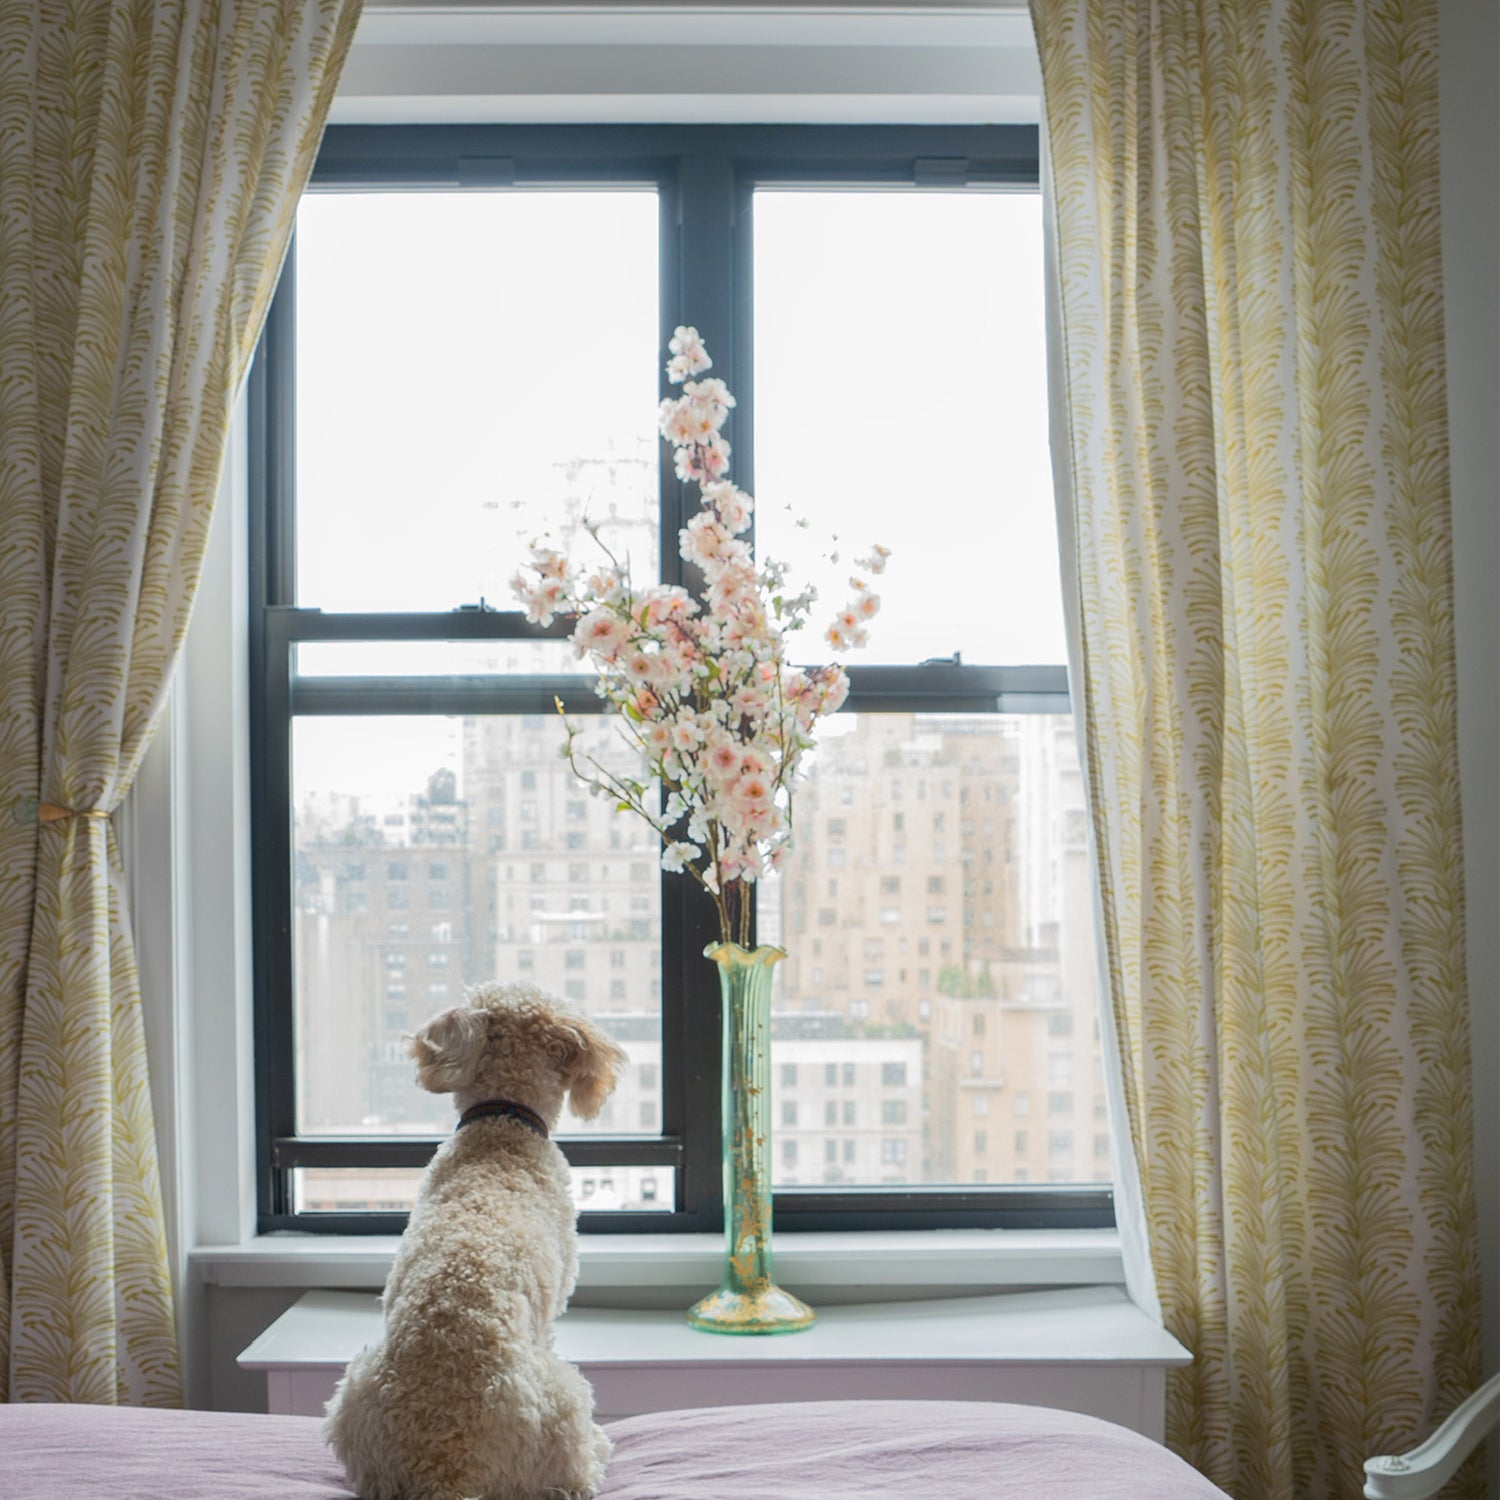 Yellow Stripe Chartreuse Printed Curtains by illuminated window facing buildings with pink and white flowers in clear vase in front of cream dog on bed